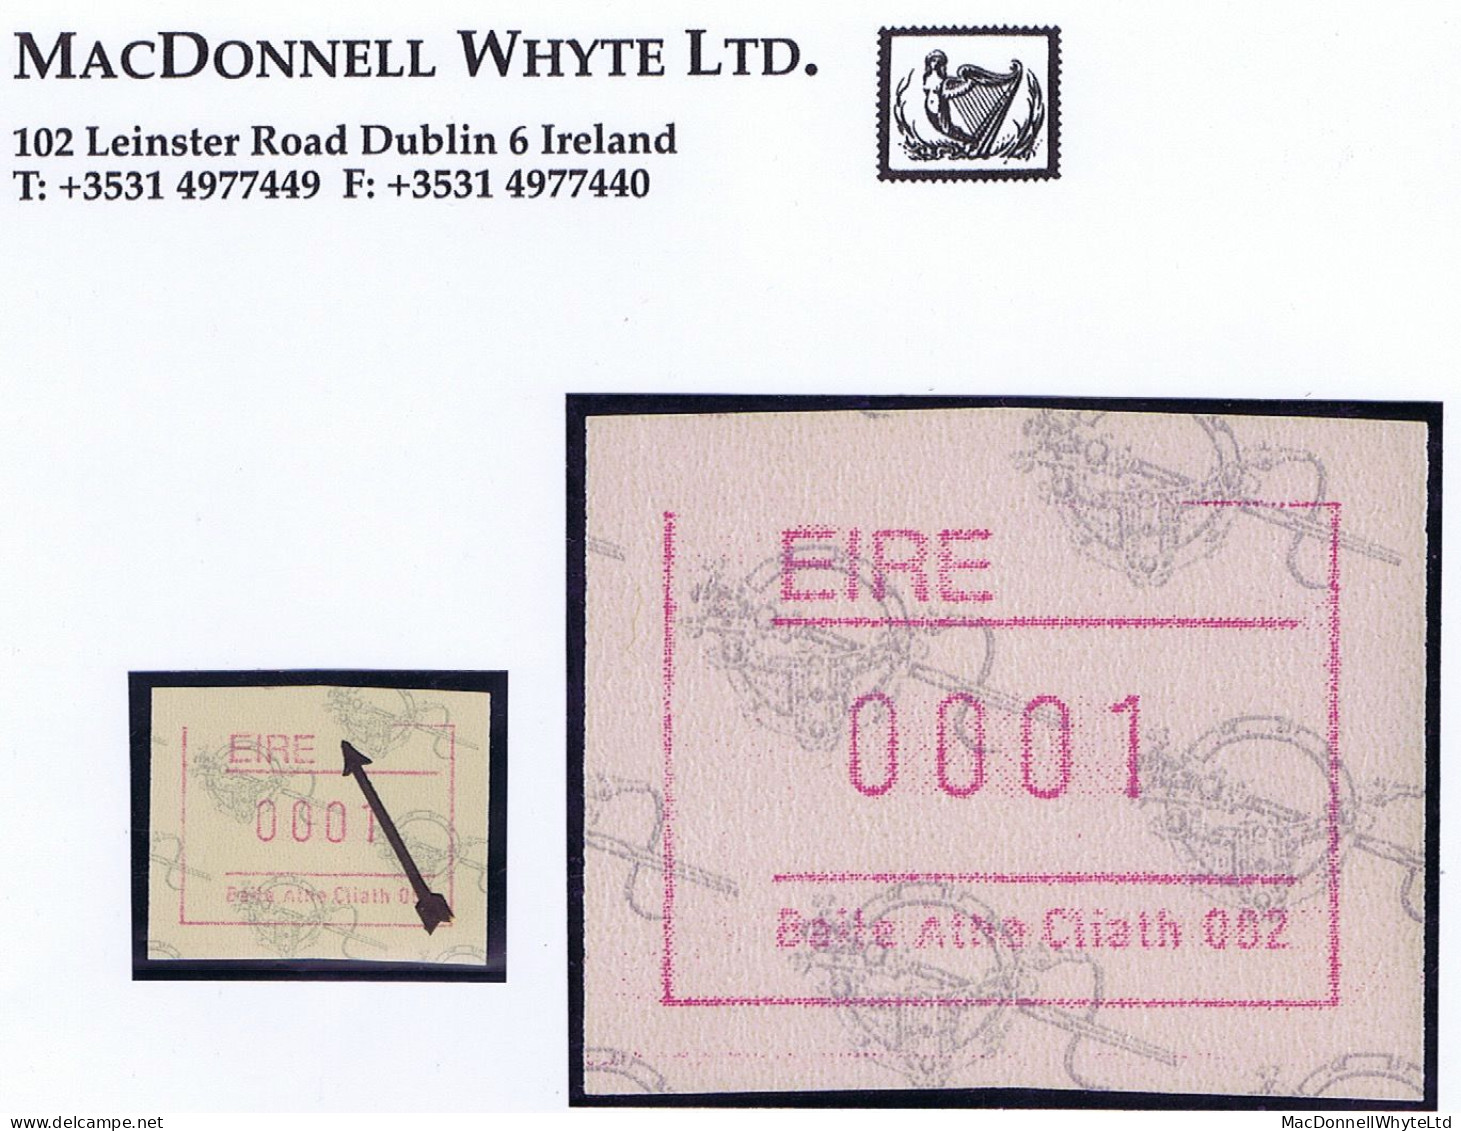 Ireland Dublin 1992 Frama Automatic Postage Labels, Dublin No.2 Machine "top Frameline Mostly Omitted" Mint - Automatenmarken (Frama)